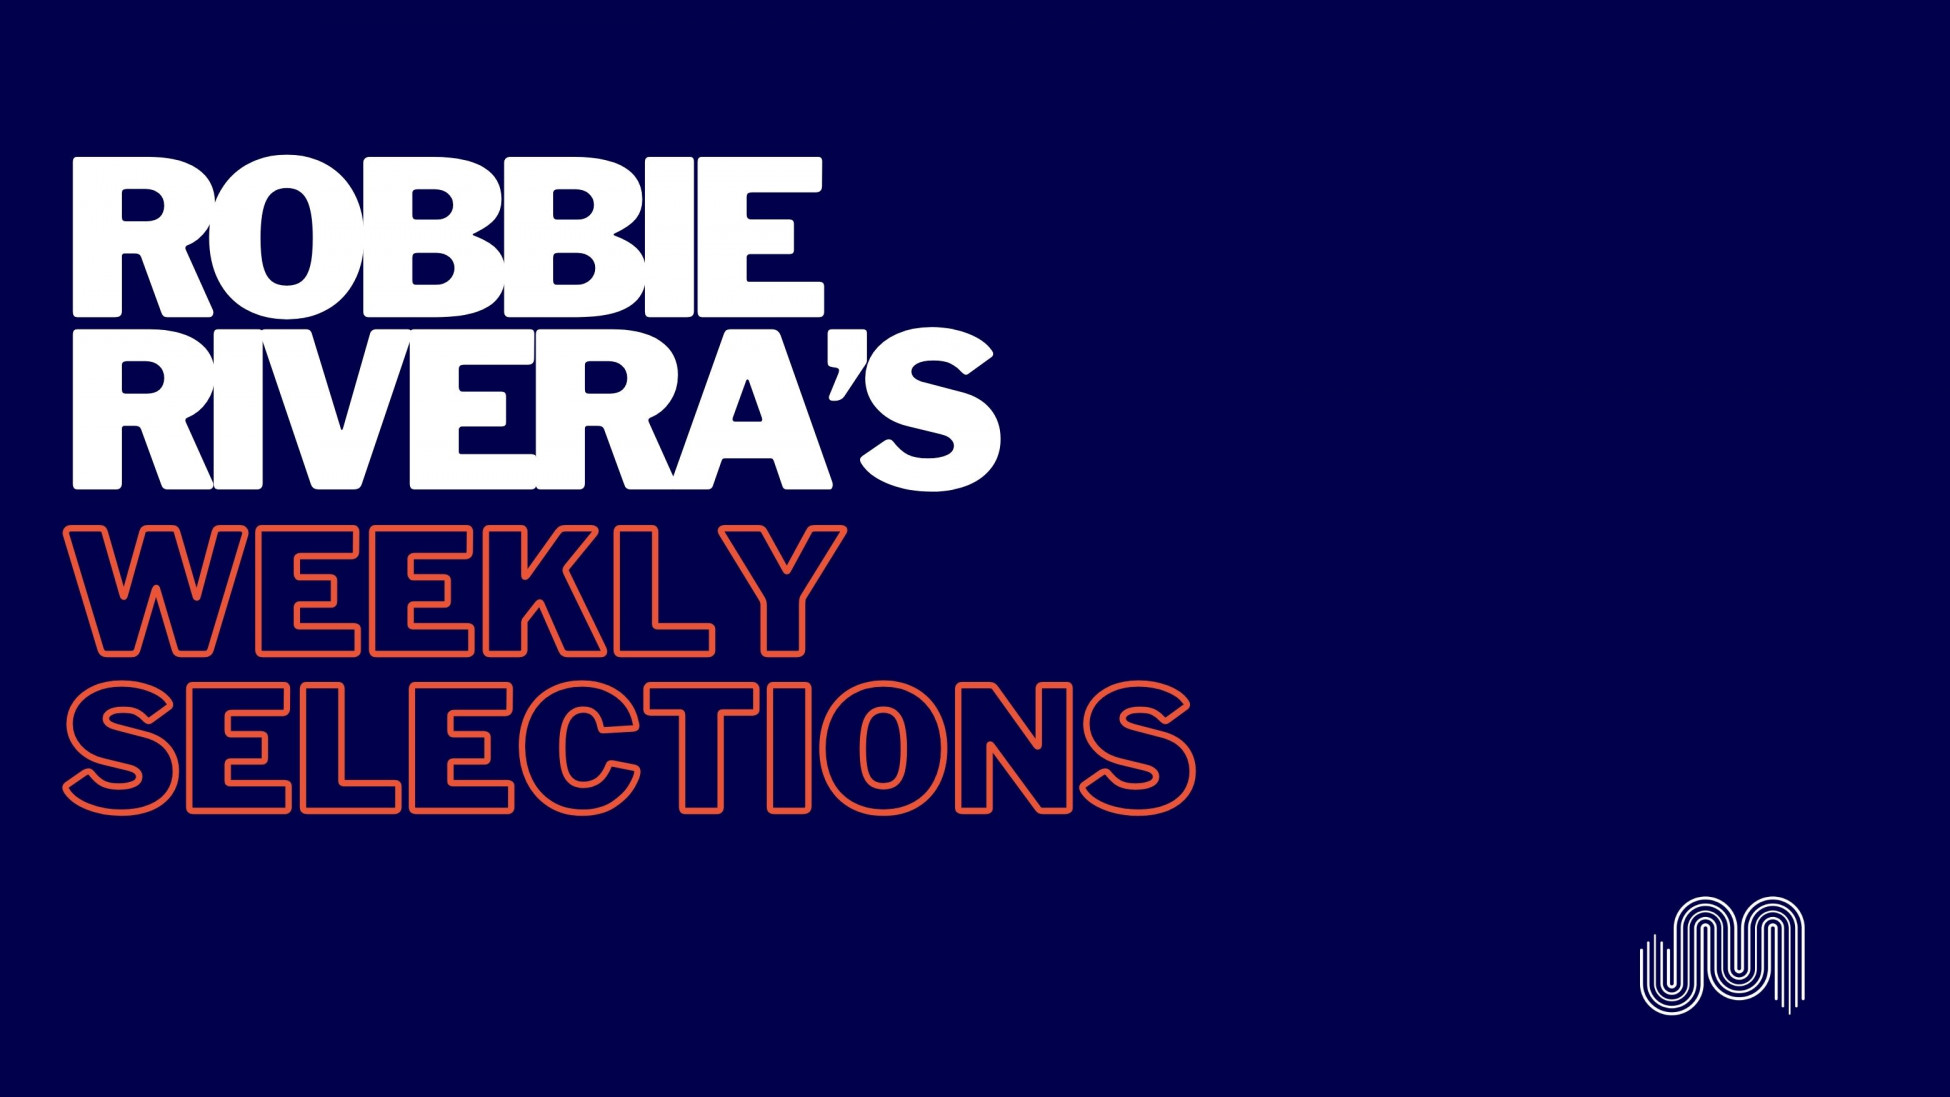 ROBBIE RIVERA'S WEEKLY SELECTIONS